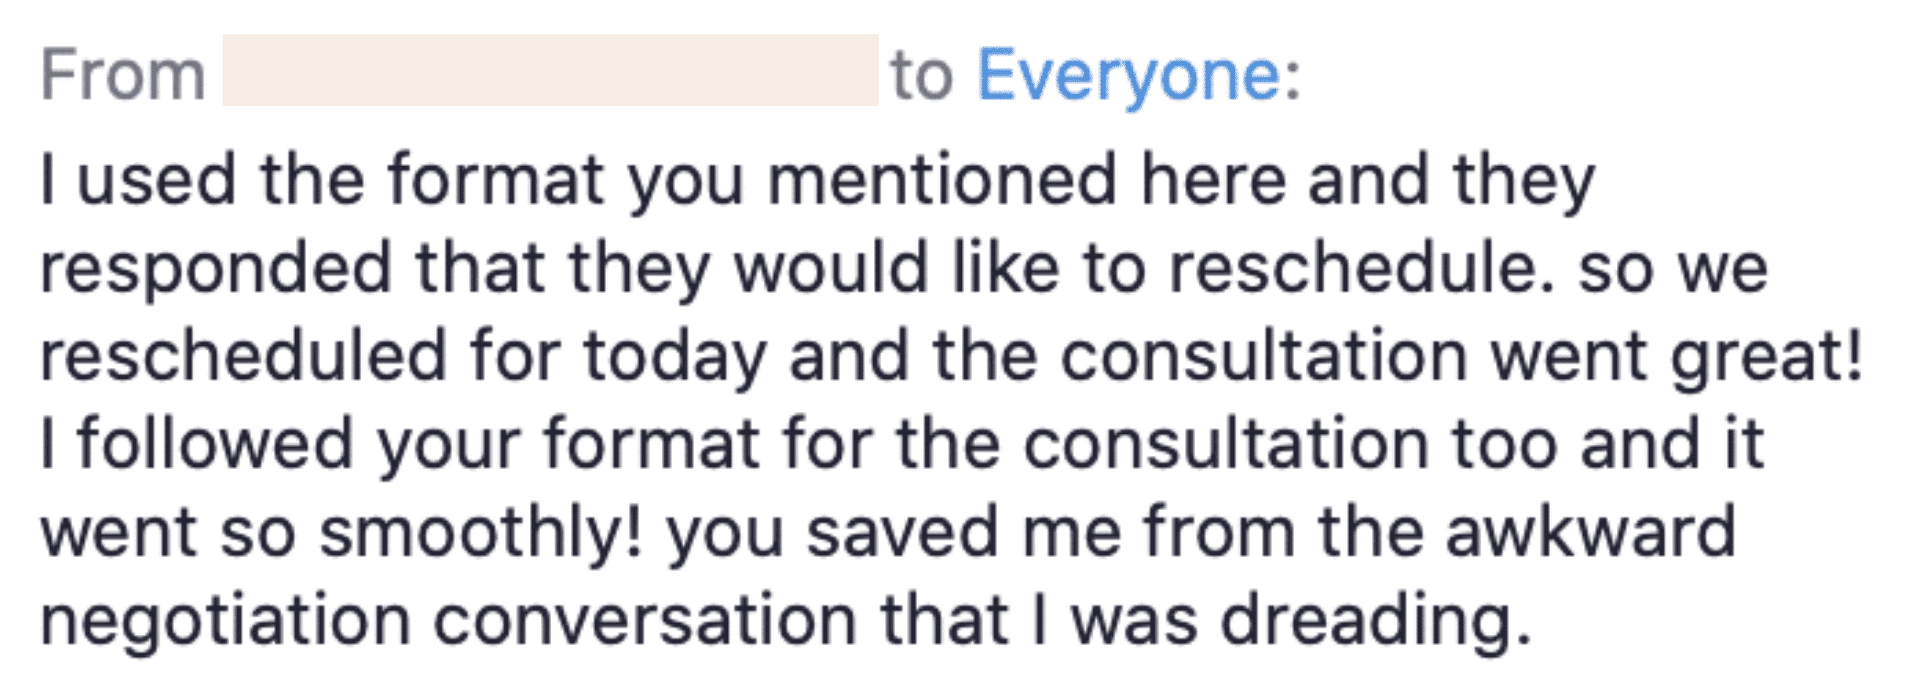 The image depicts a person thanking someone for helping them successfully navigate a difficult conversation by providing a format to follow. Full Text: From to Everyone: I used the format you mentioned here and they responded that they would like to reschedule. so we rescheduled for today and the consultation went great! I followed your format for the consultation too and it went so smoothly! you saved me from the awkward negotiation conversation that I was dreading.